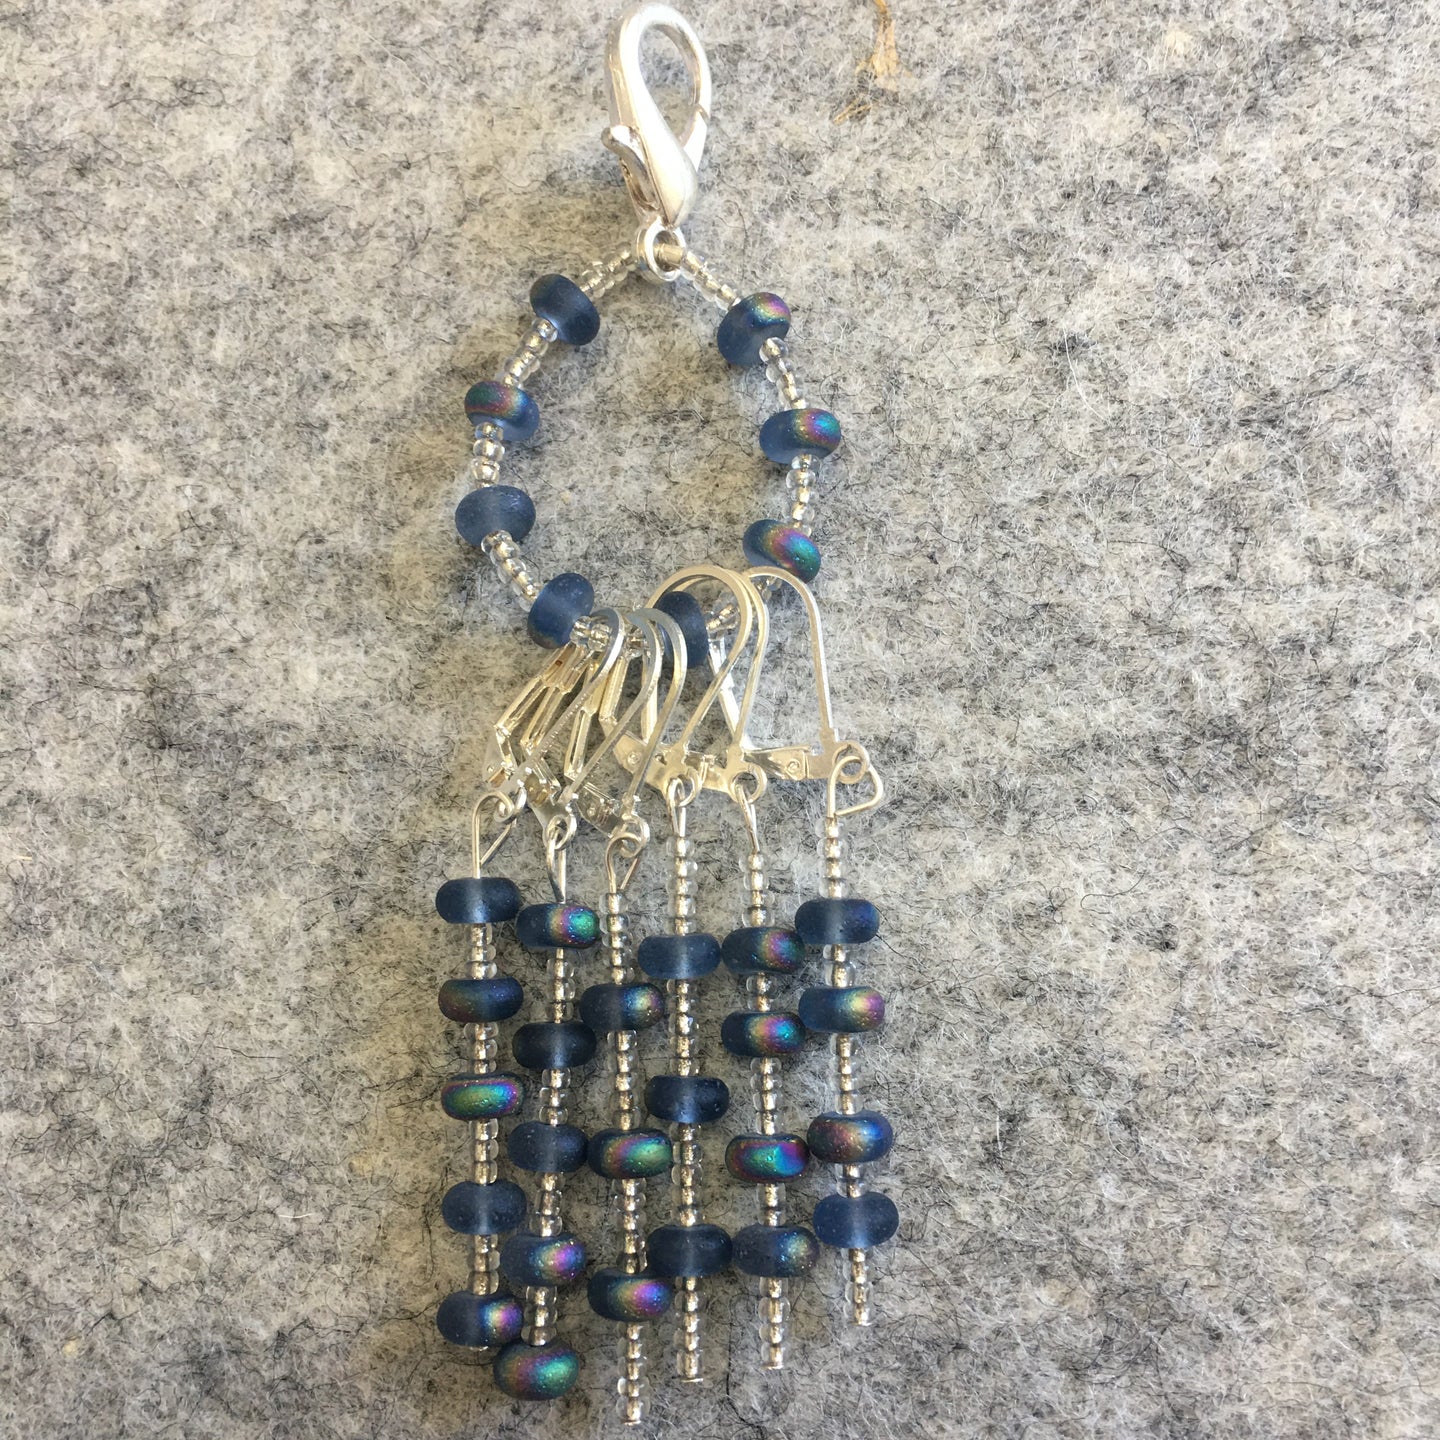 Blue Frost Stitch marker Sets with matching keeper clip